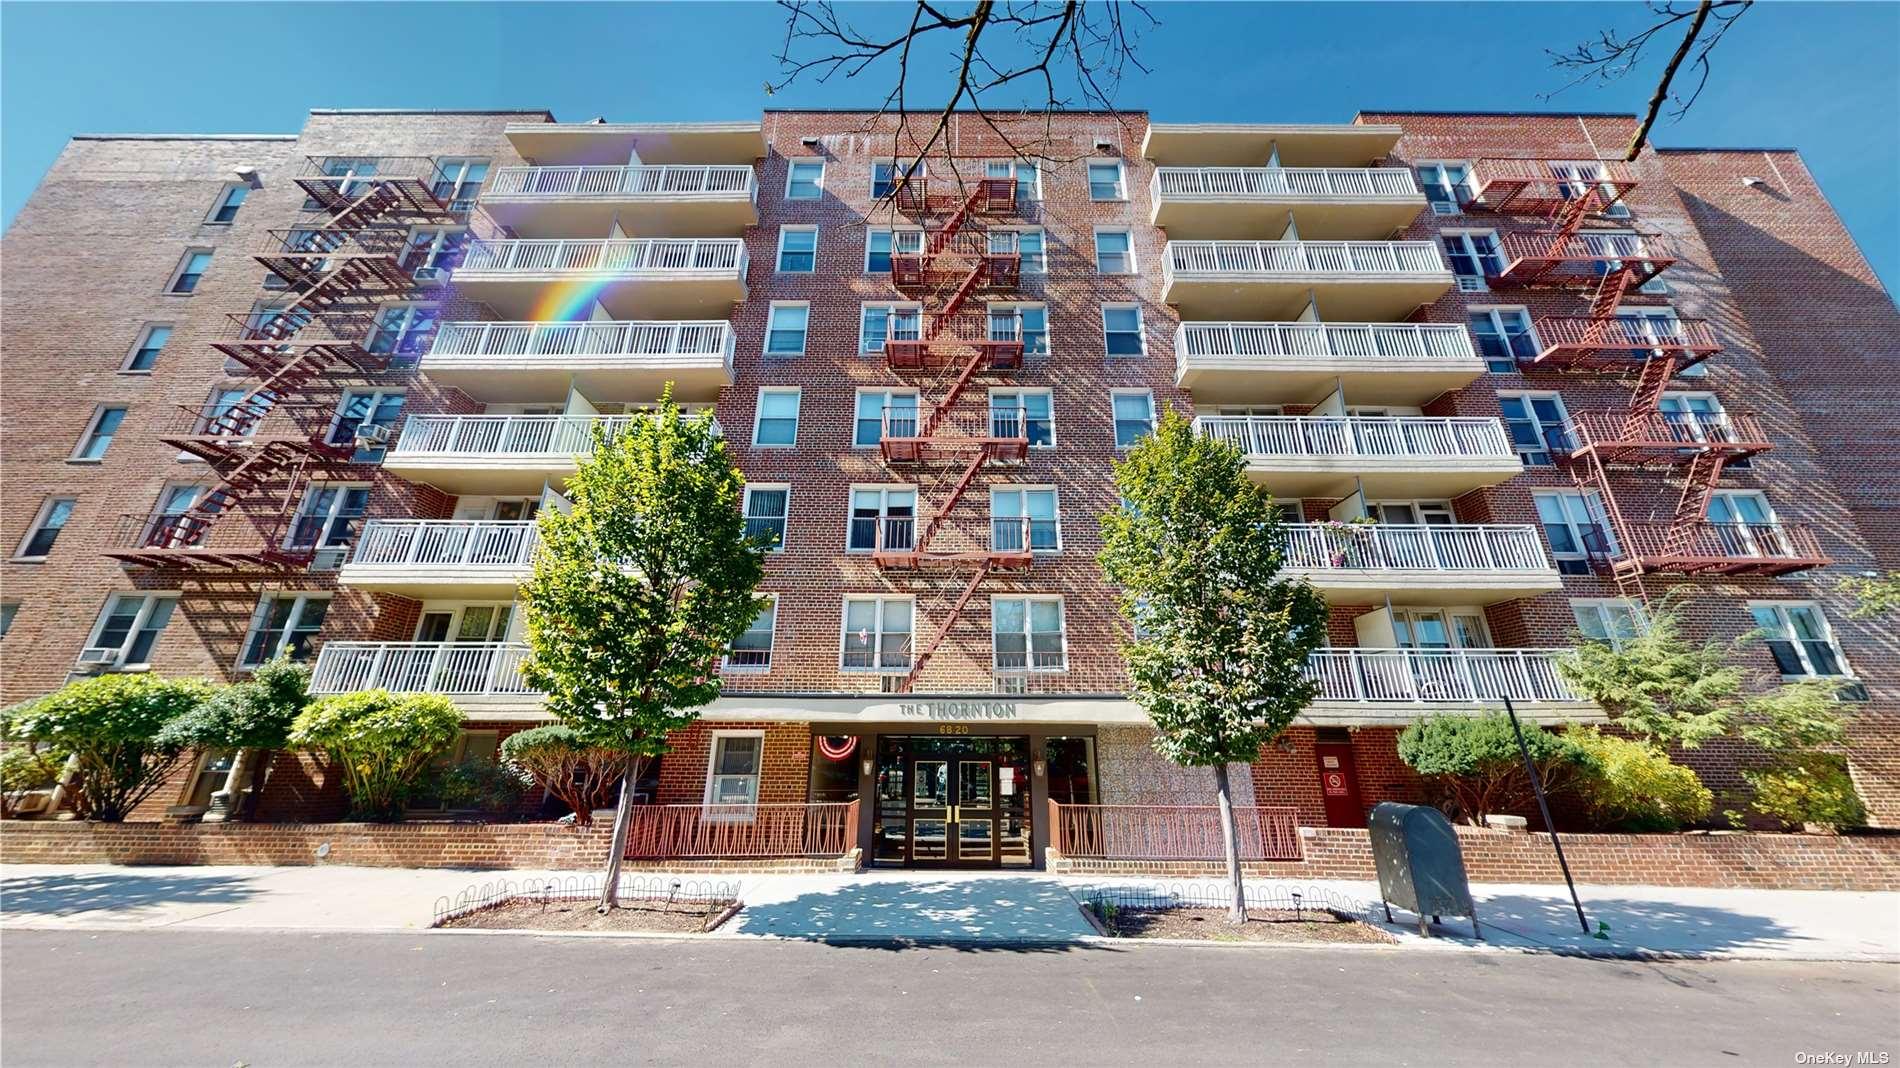 68-20 Selfridge St. #4N in Queens, Forest Hills, NY 11375